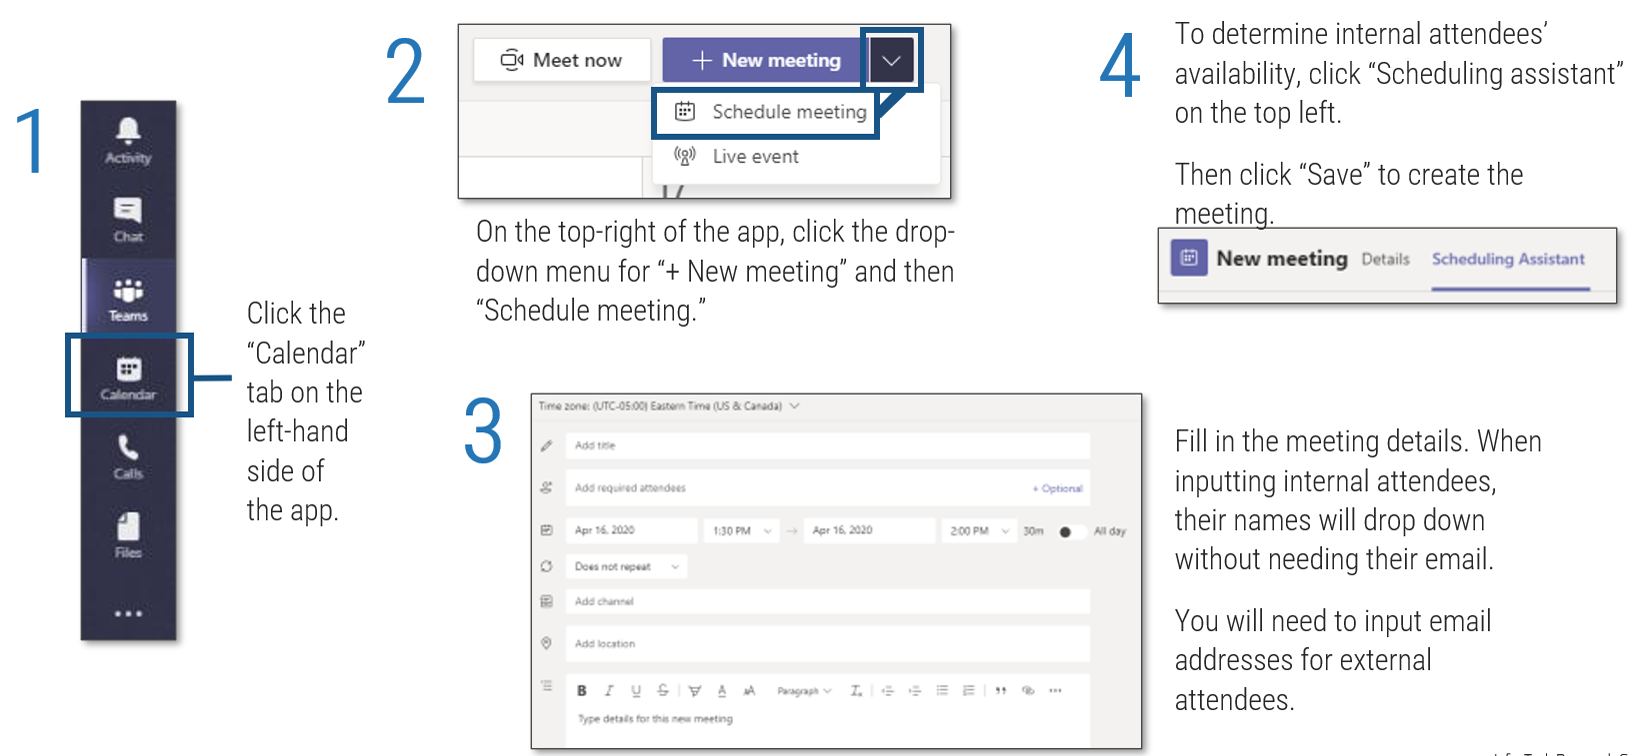 Screenshots detailing how to create a scheduled meeting in Microsoft Teams, steps 1 to 4. Step 1:'Click the “Calendar” tab on the left-hand side of the app'. Step 2: 'On the top-right of the app, click the drop-down menu for “+ New meeting” and then “Schedule meeting.”' Step 3: 'Fill in the meeting details. When inputting internal attendees, their names will drop down without needing their email. You will need to input email addresses for external attendees'. Step 4: 'To determine internal attendees’ availability, click “Scheduling assistant” on the top left. Then click “Save” to create the meeting'.